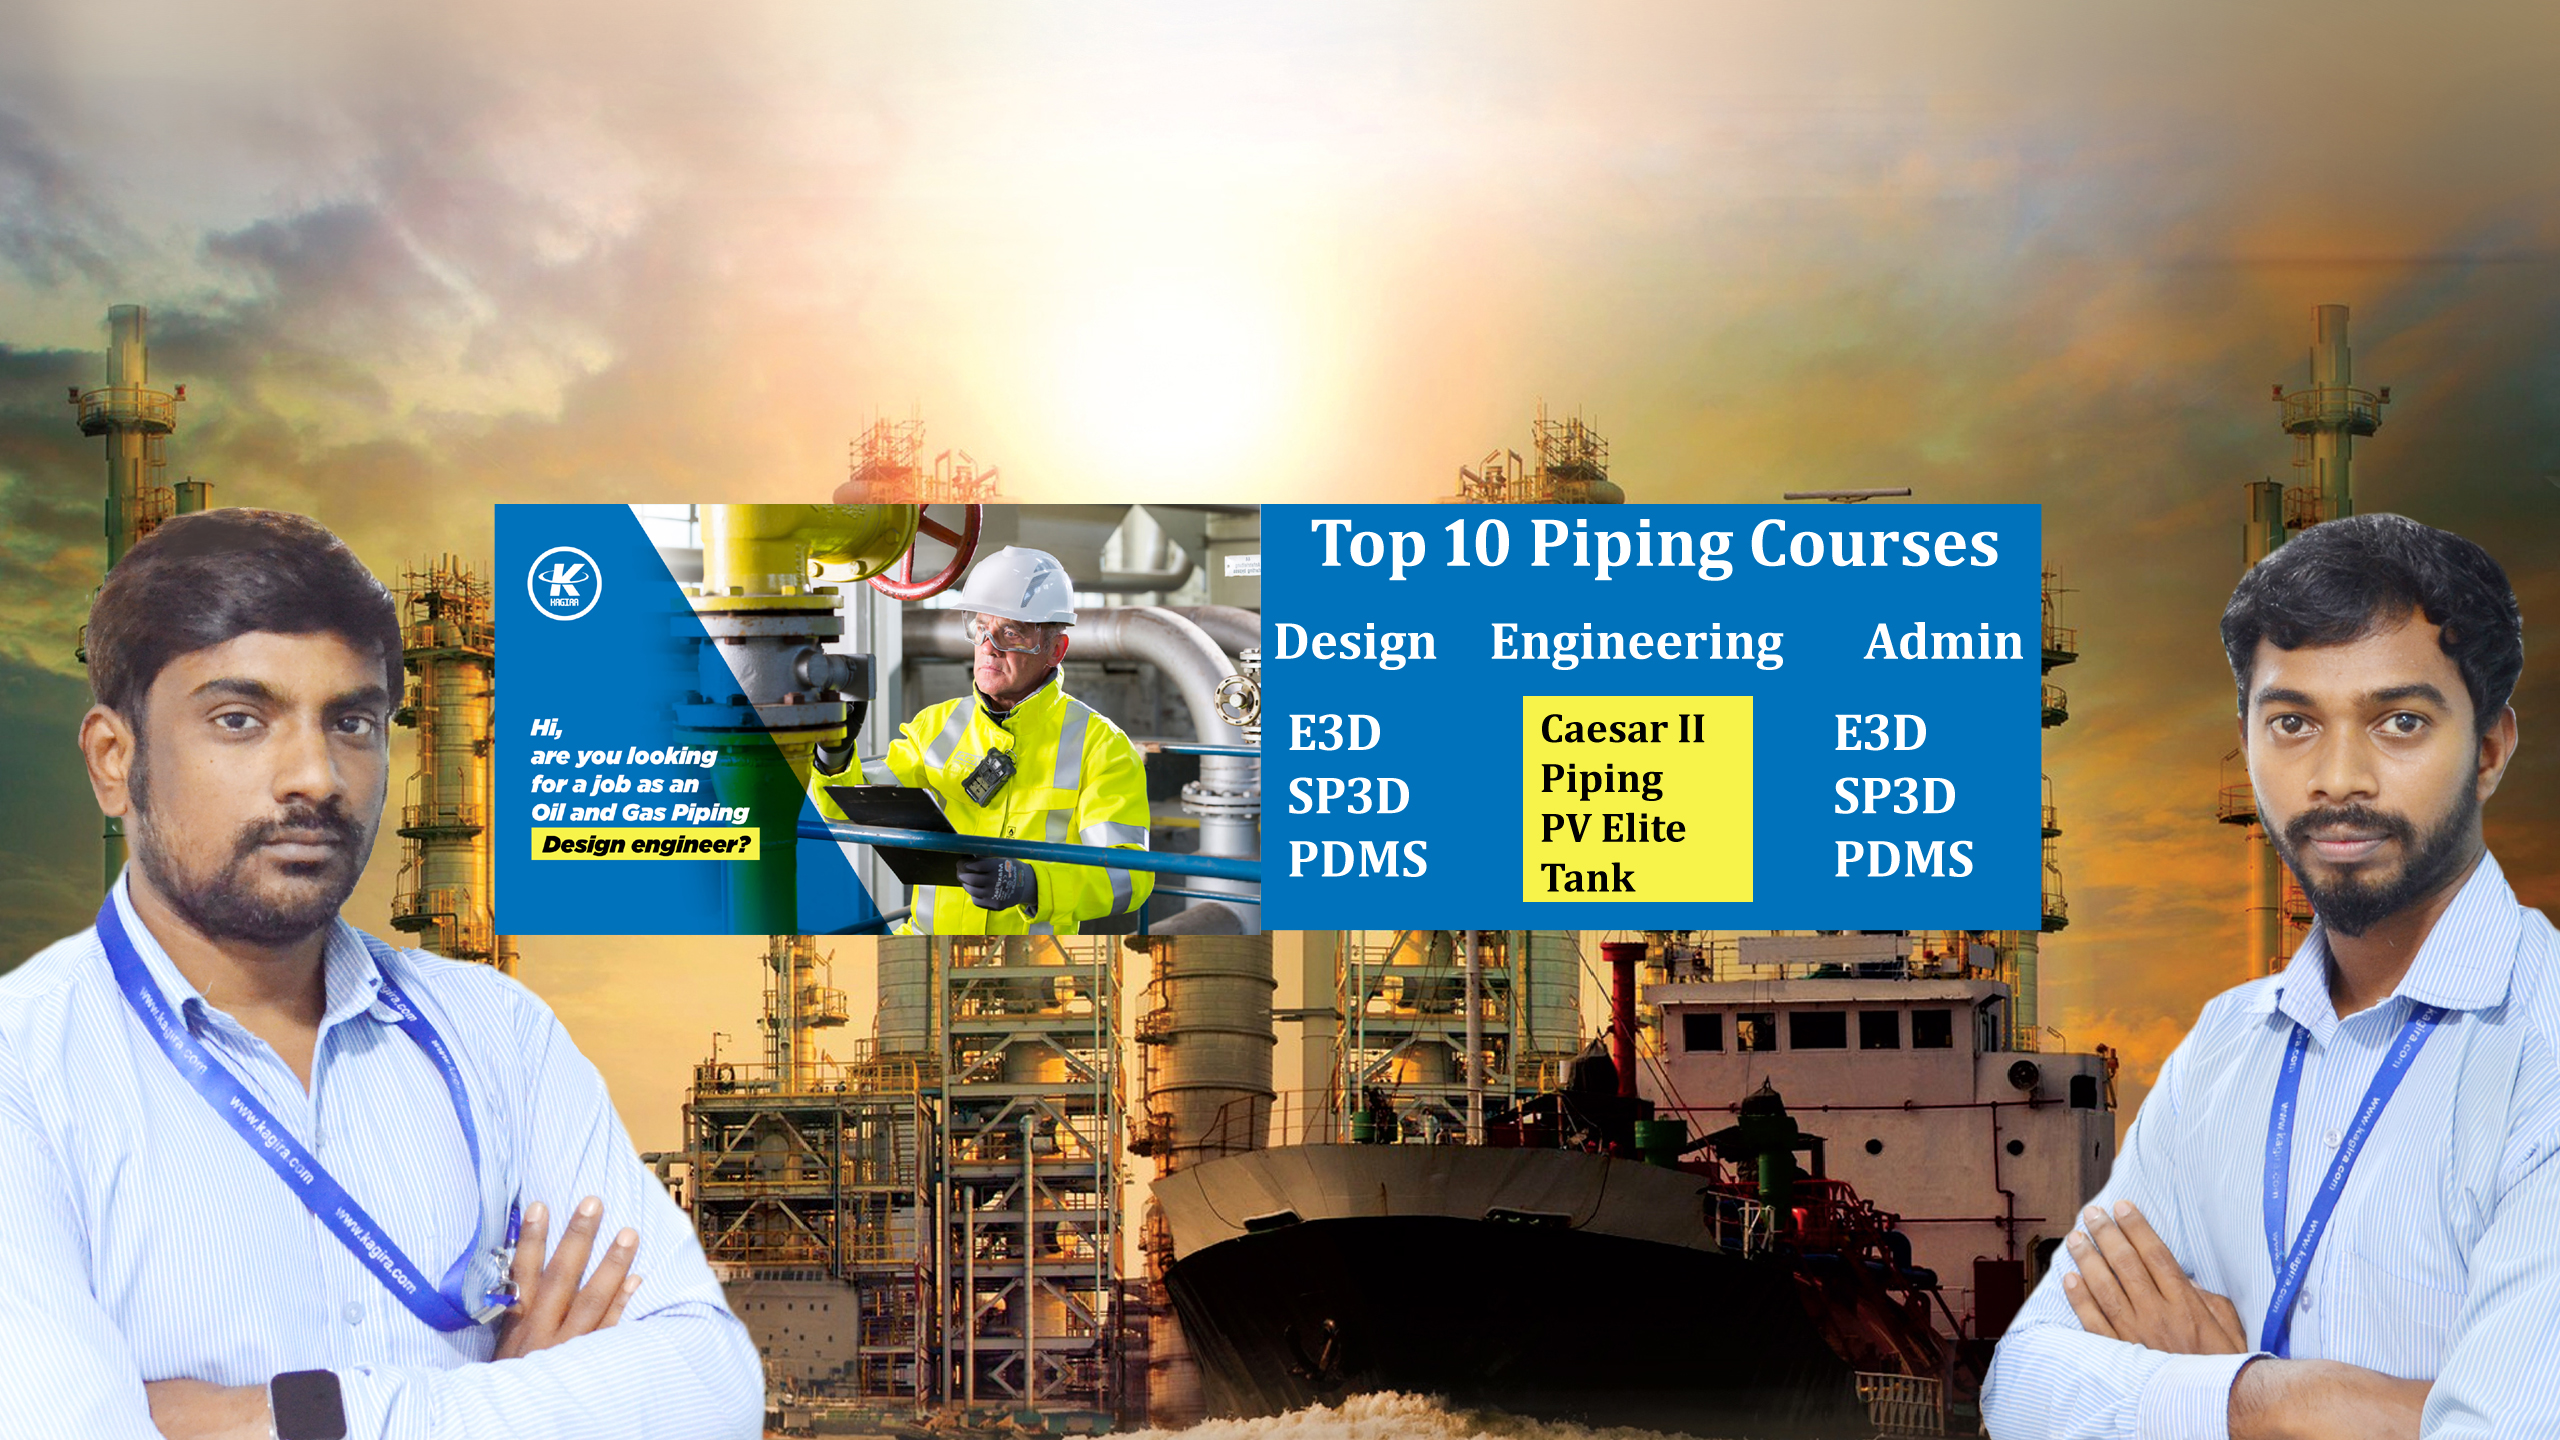 What is a pipeline engineering course?